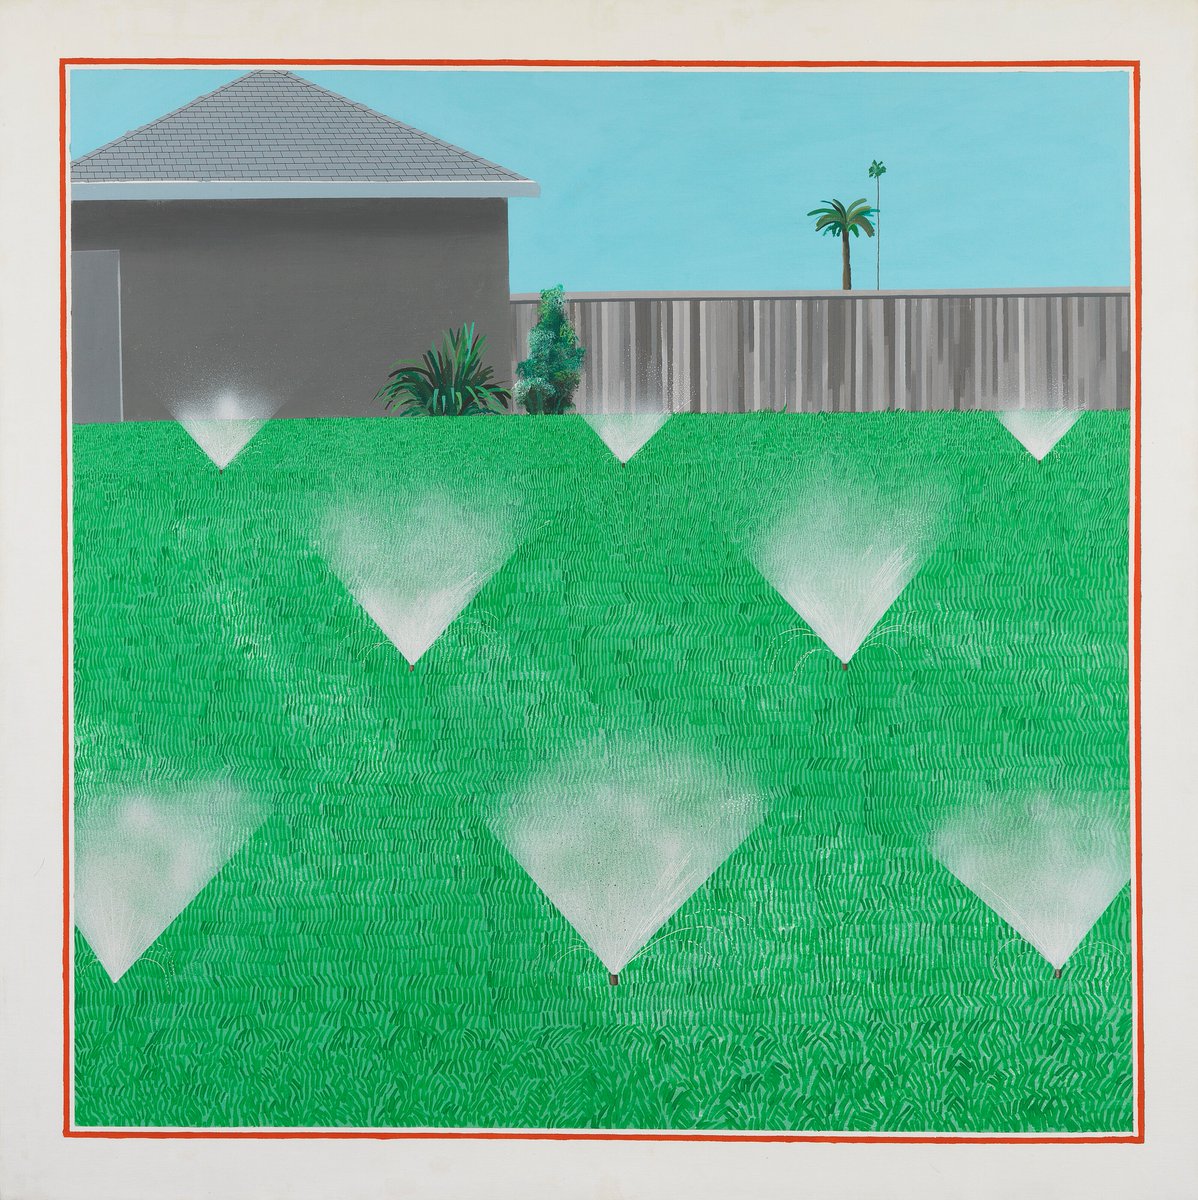 From The Collection of Norman and Lyn Lear, David Hockney's iconic 'A Lawn Being Sprinkled' has sold for $28,585,000 during the #20thCenturyEveningSale